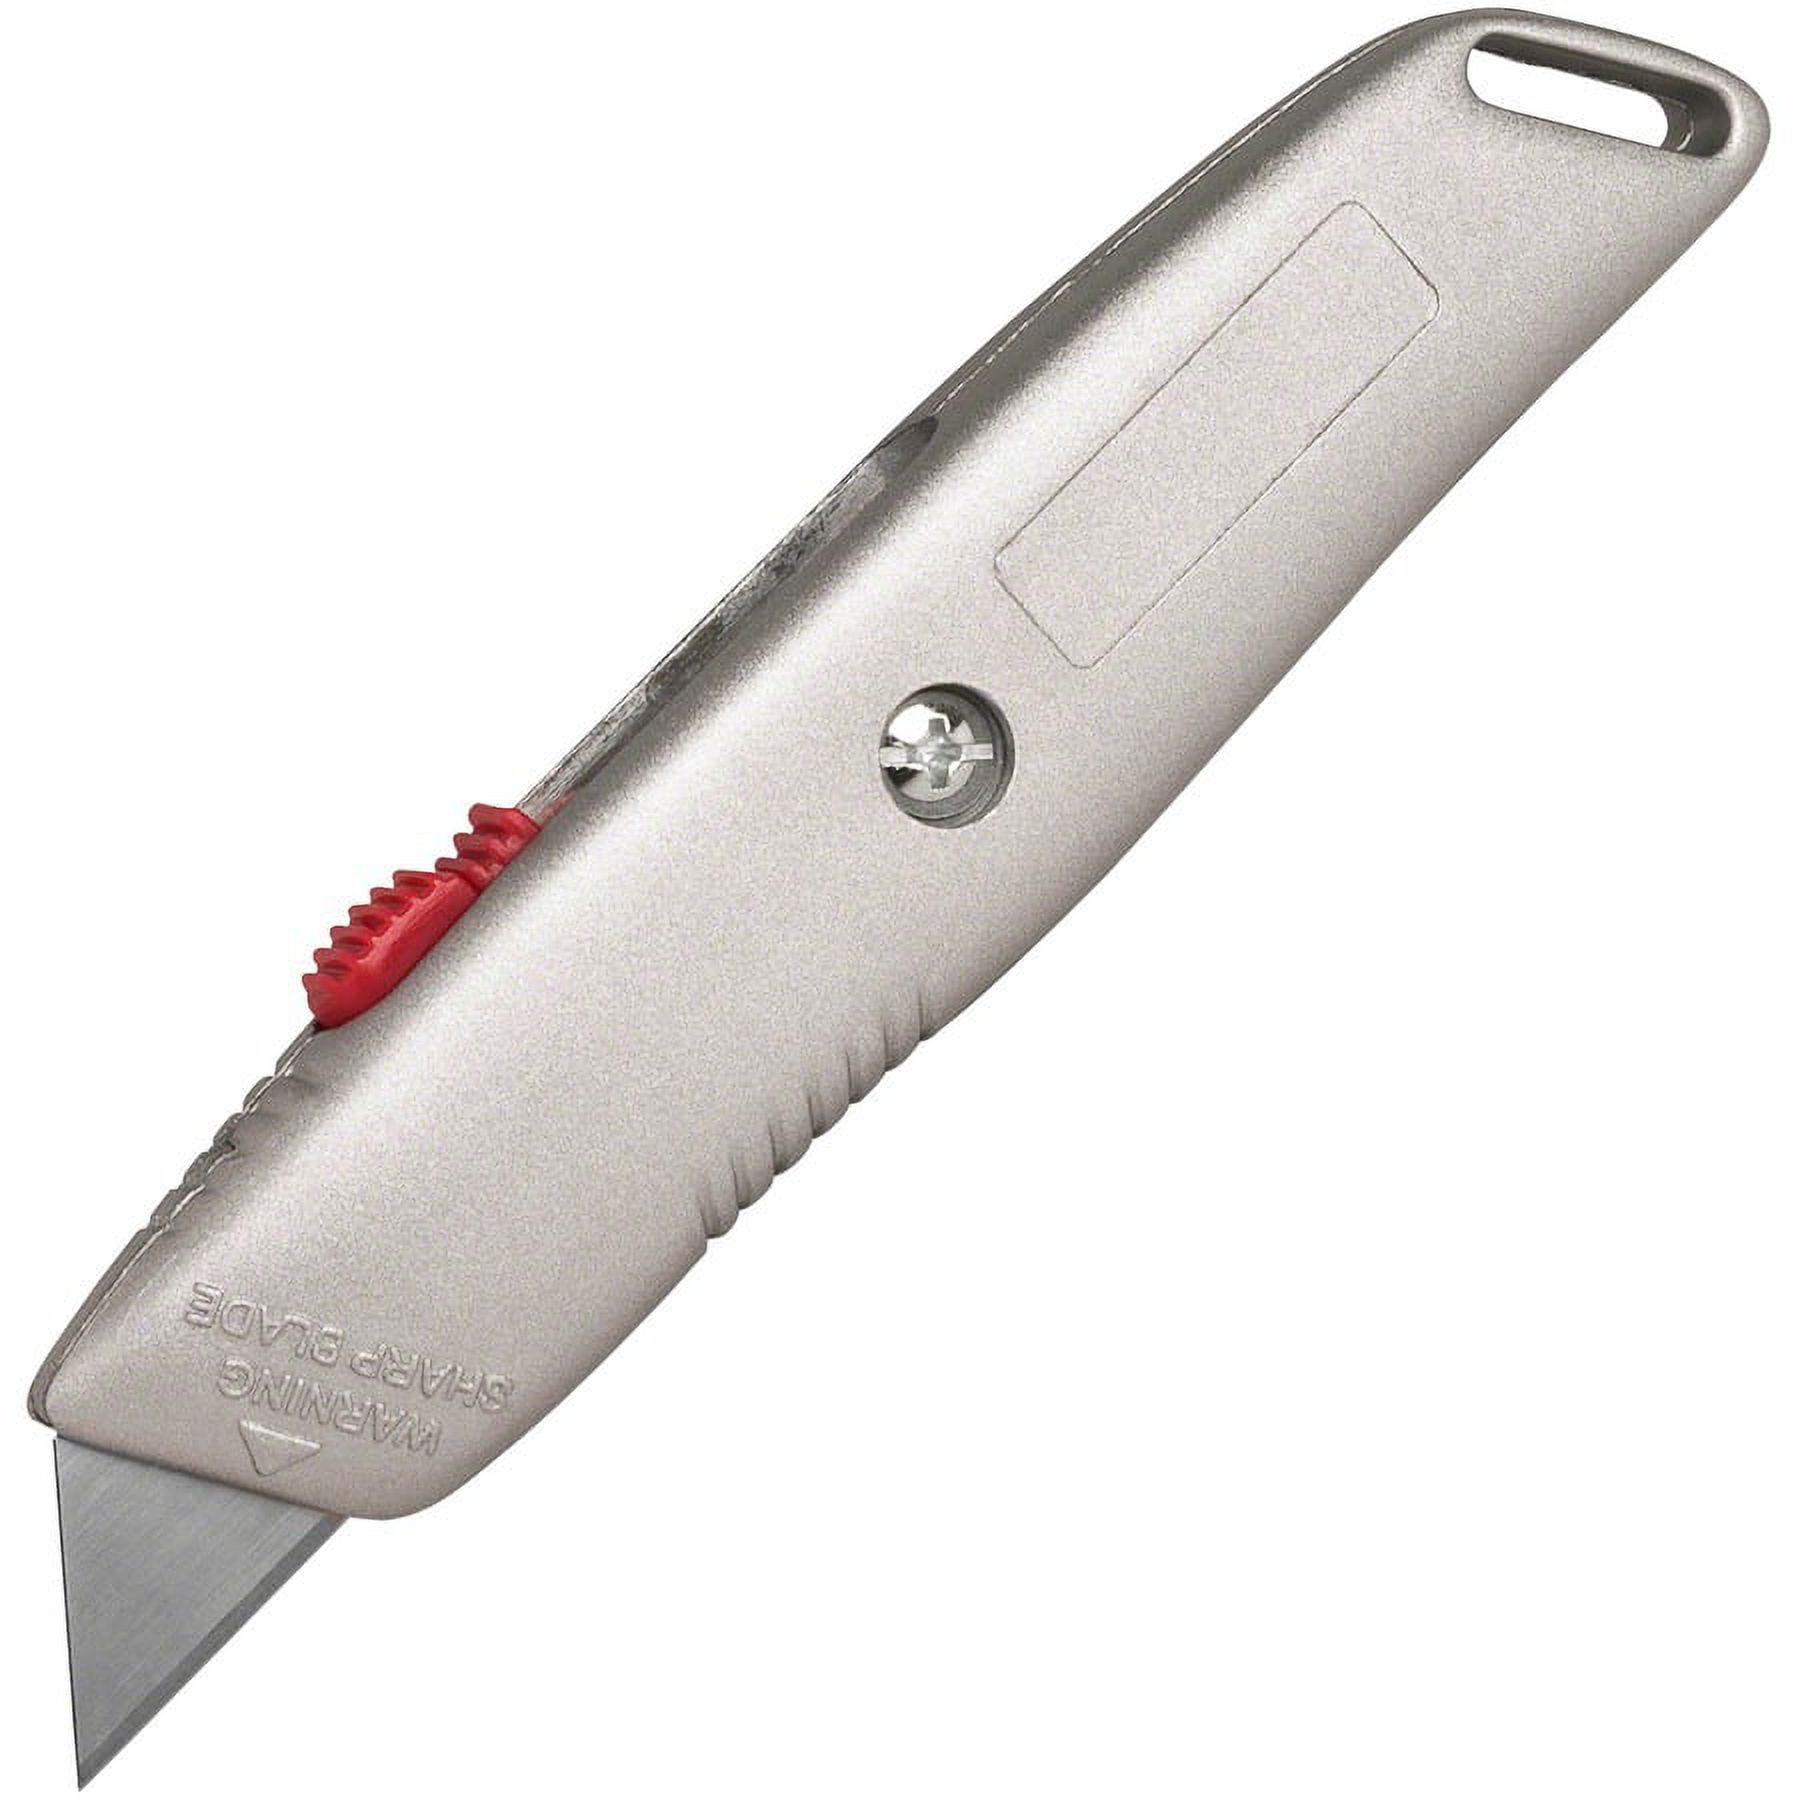 Gerber EAB Lite Stainless Steel Exchange-A-Blade Utility Razor Pocket Knife  with Clip 